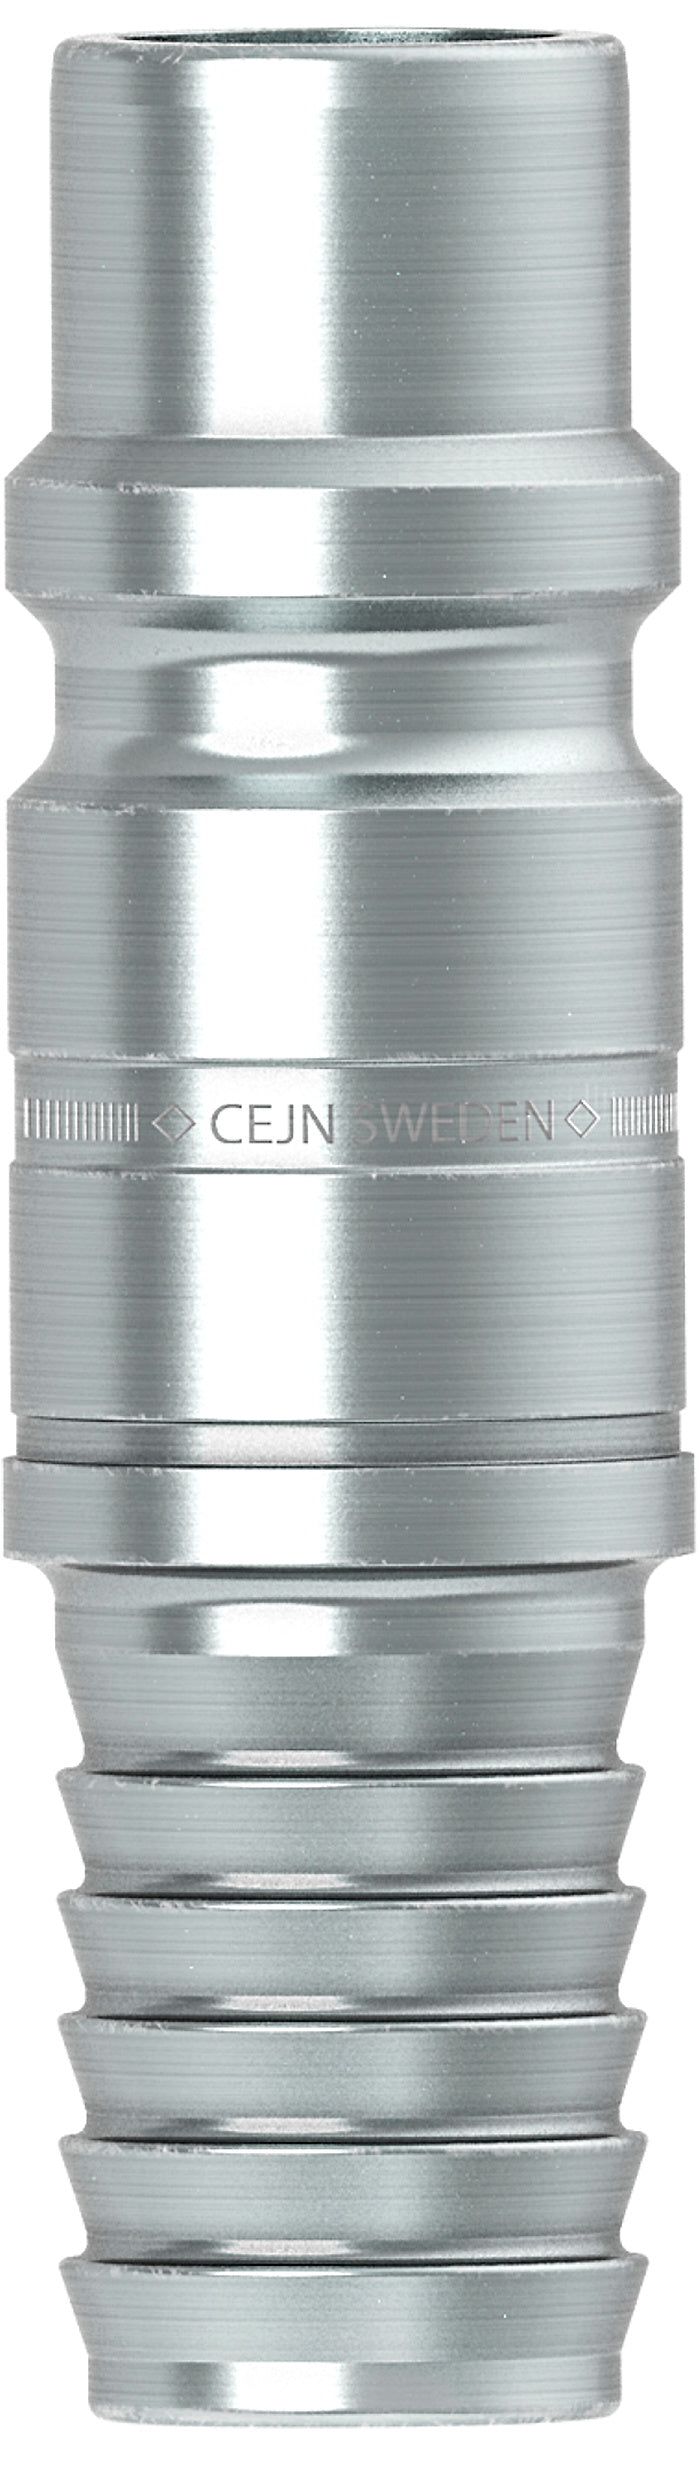 CEJN 10-358-6151 | Male Nipple Coupling with Valve, R 1/8"